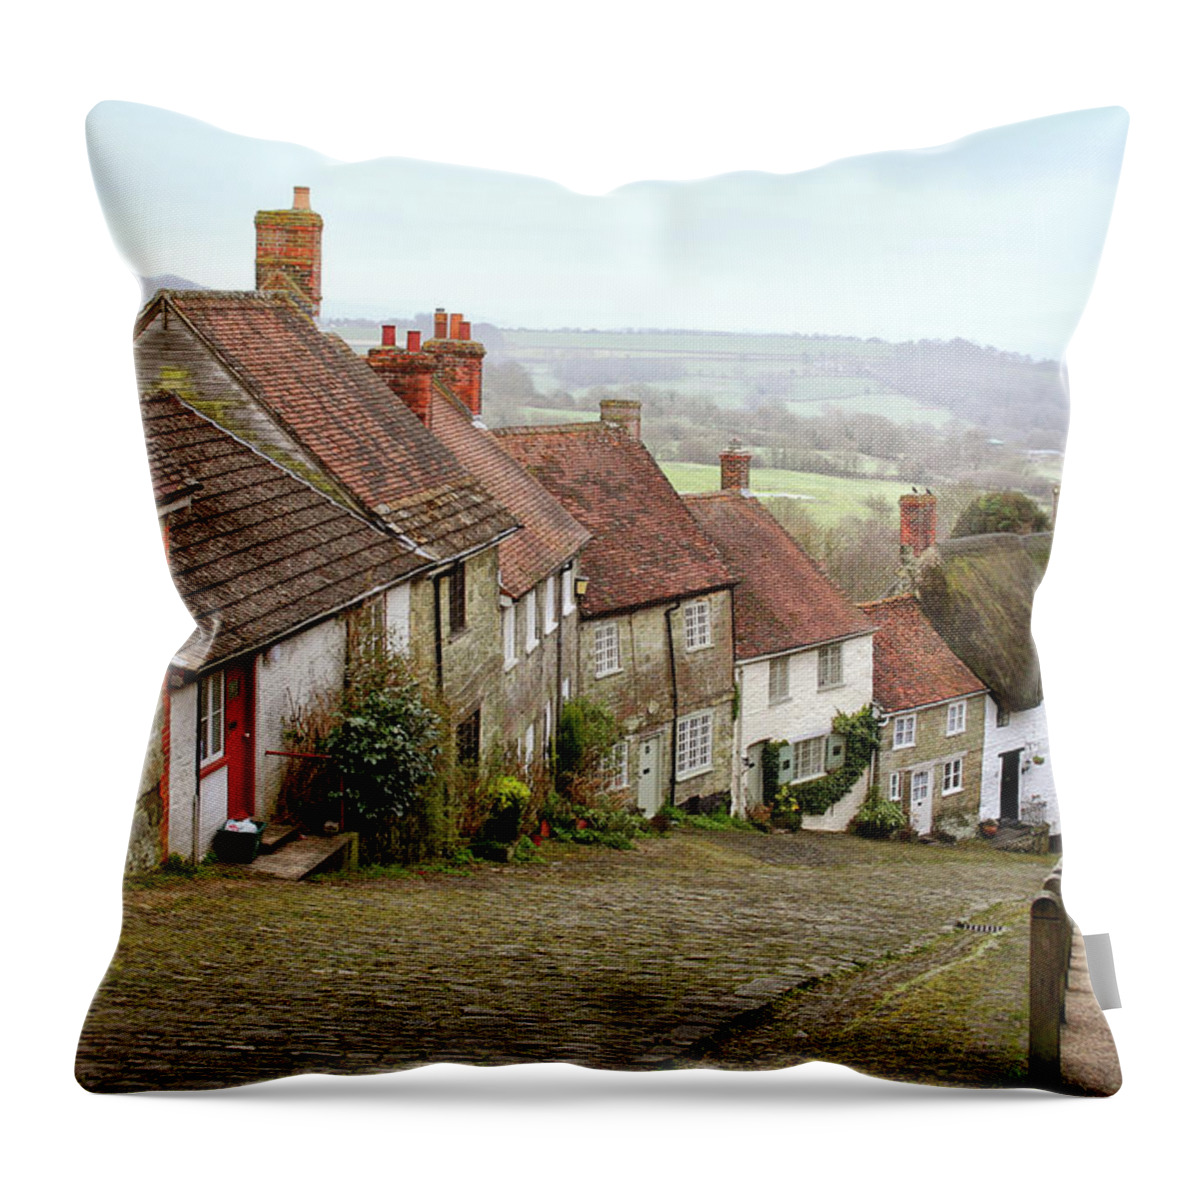 Tranquility Throw Pillow featuring the photograph Gold Hill, Shaftesbury by Larigan - Patricia Hamilton